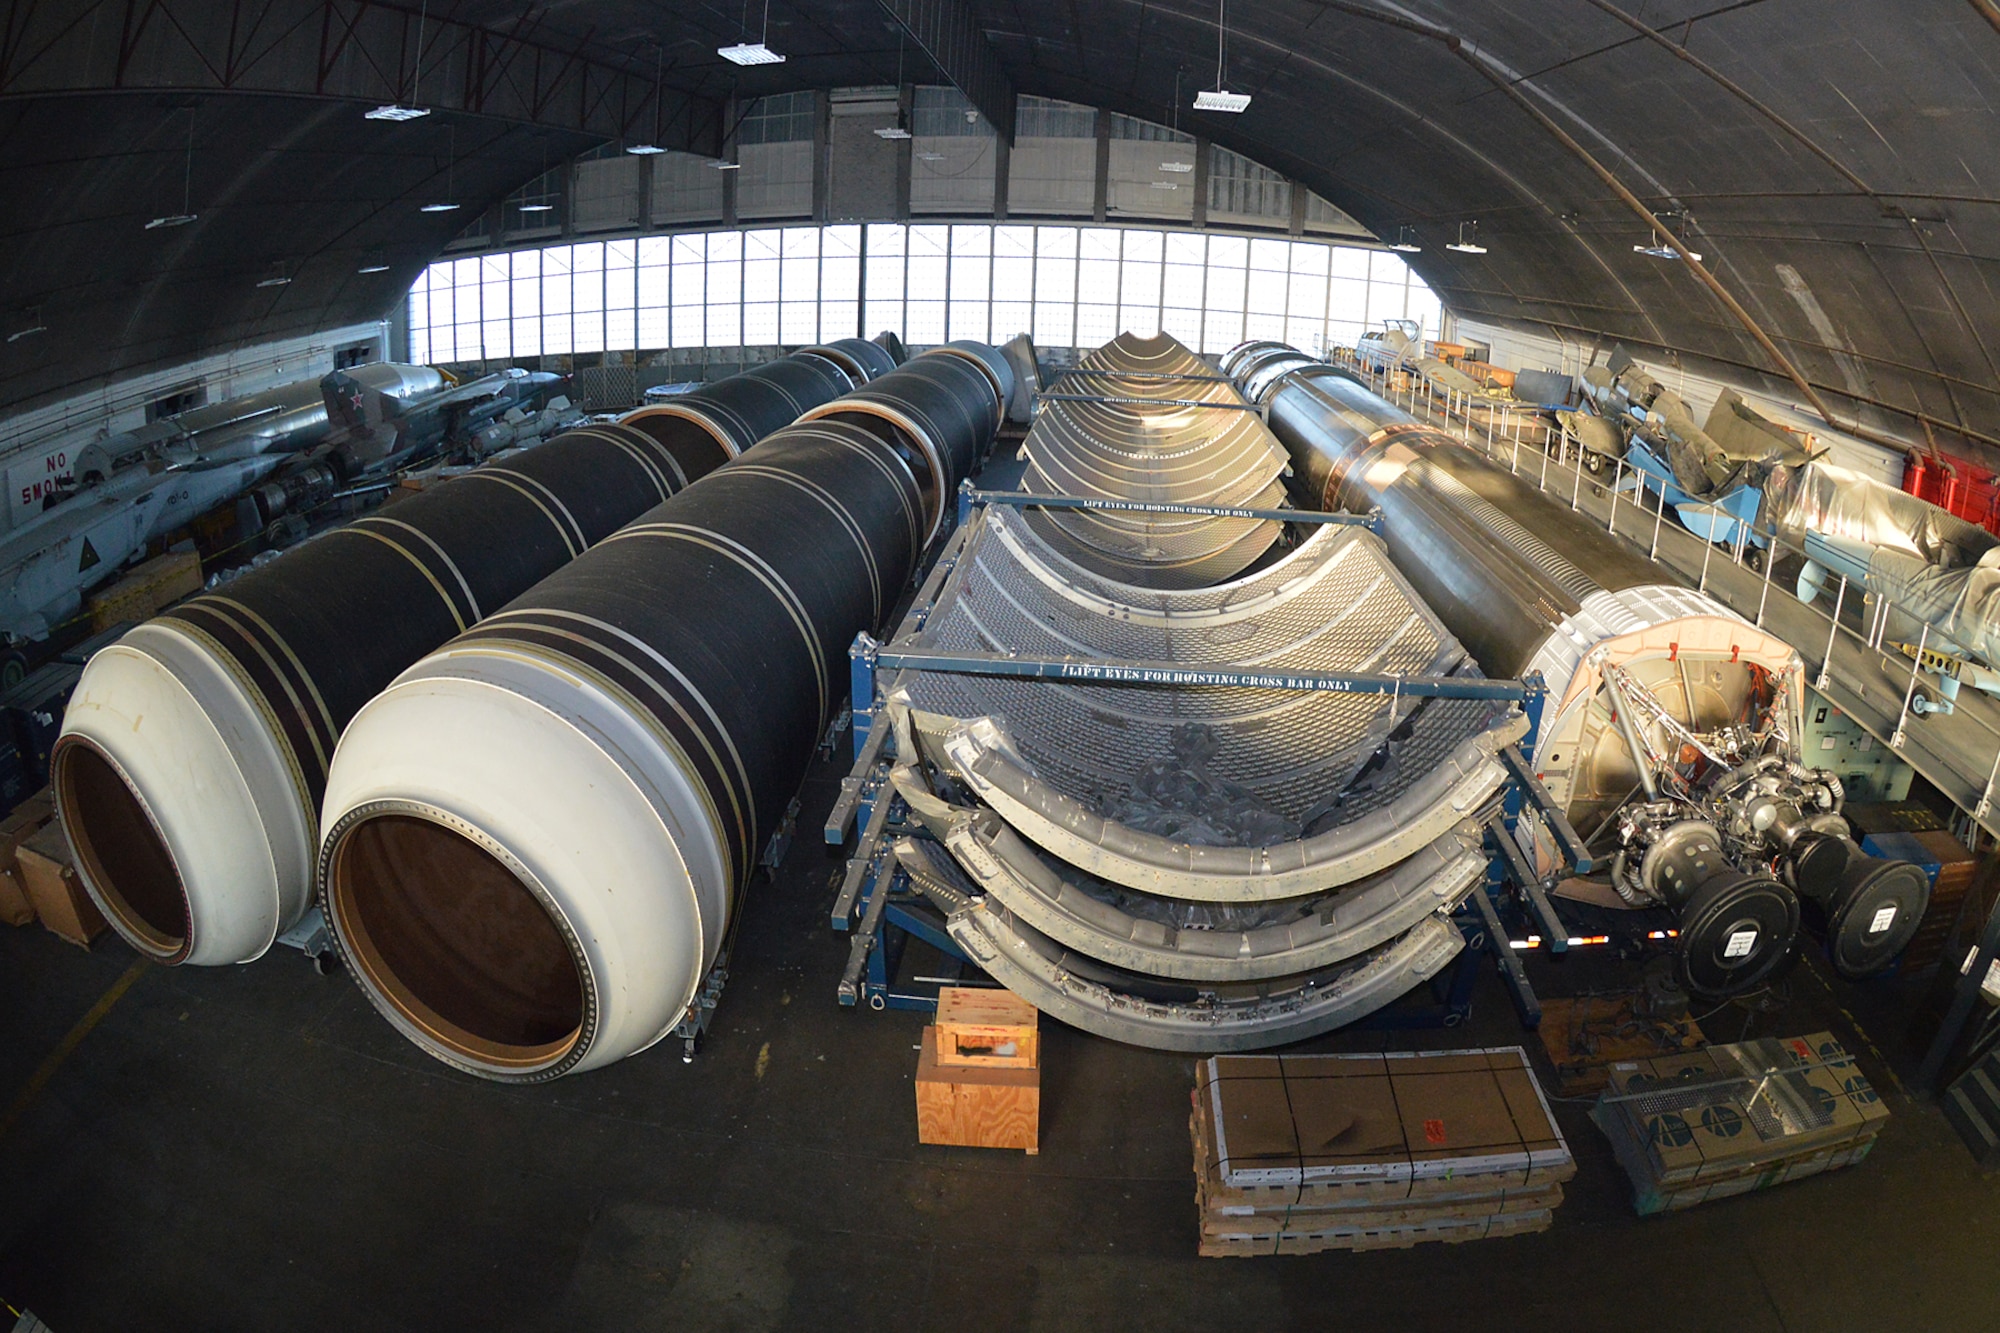 DAYTON, Ohio (08/2014) -- The Titan IVB space launch vehicle in the restoration hangar at the National Museum of the United States Air Force. (U.S. Air Force photo)